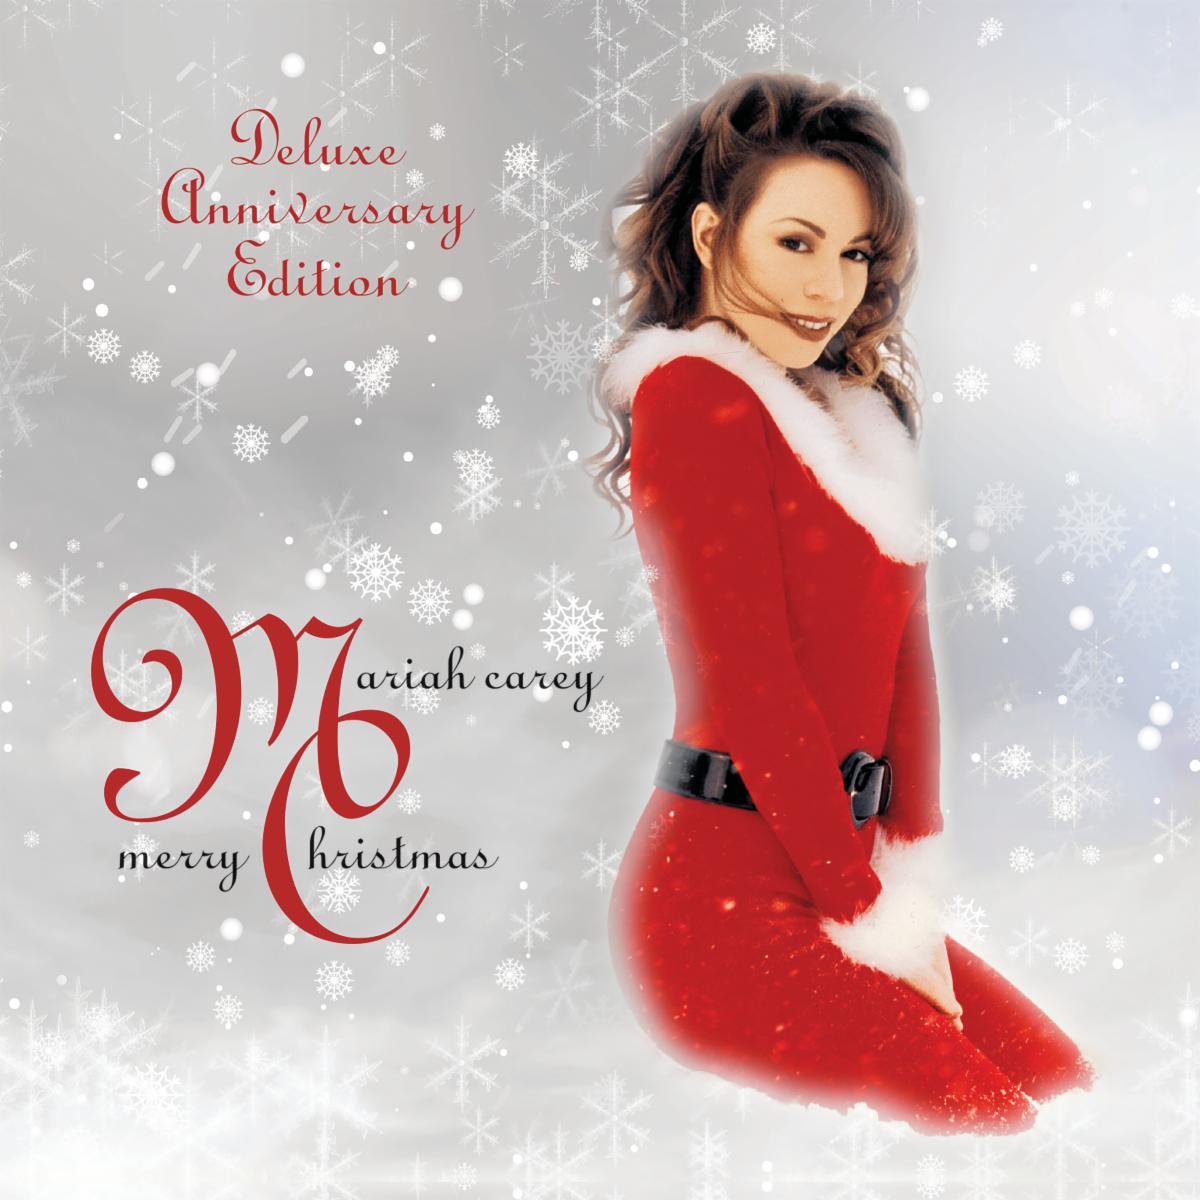 Mariah Carey Releases Deluxe Anniversary Edition of "Merry Christmas" Album With Previously Unheard Songs